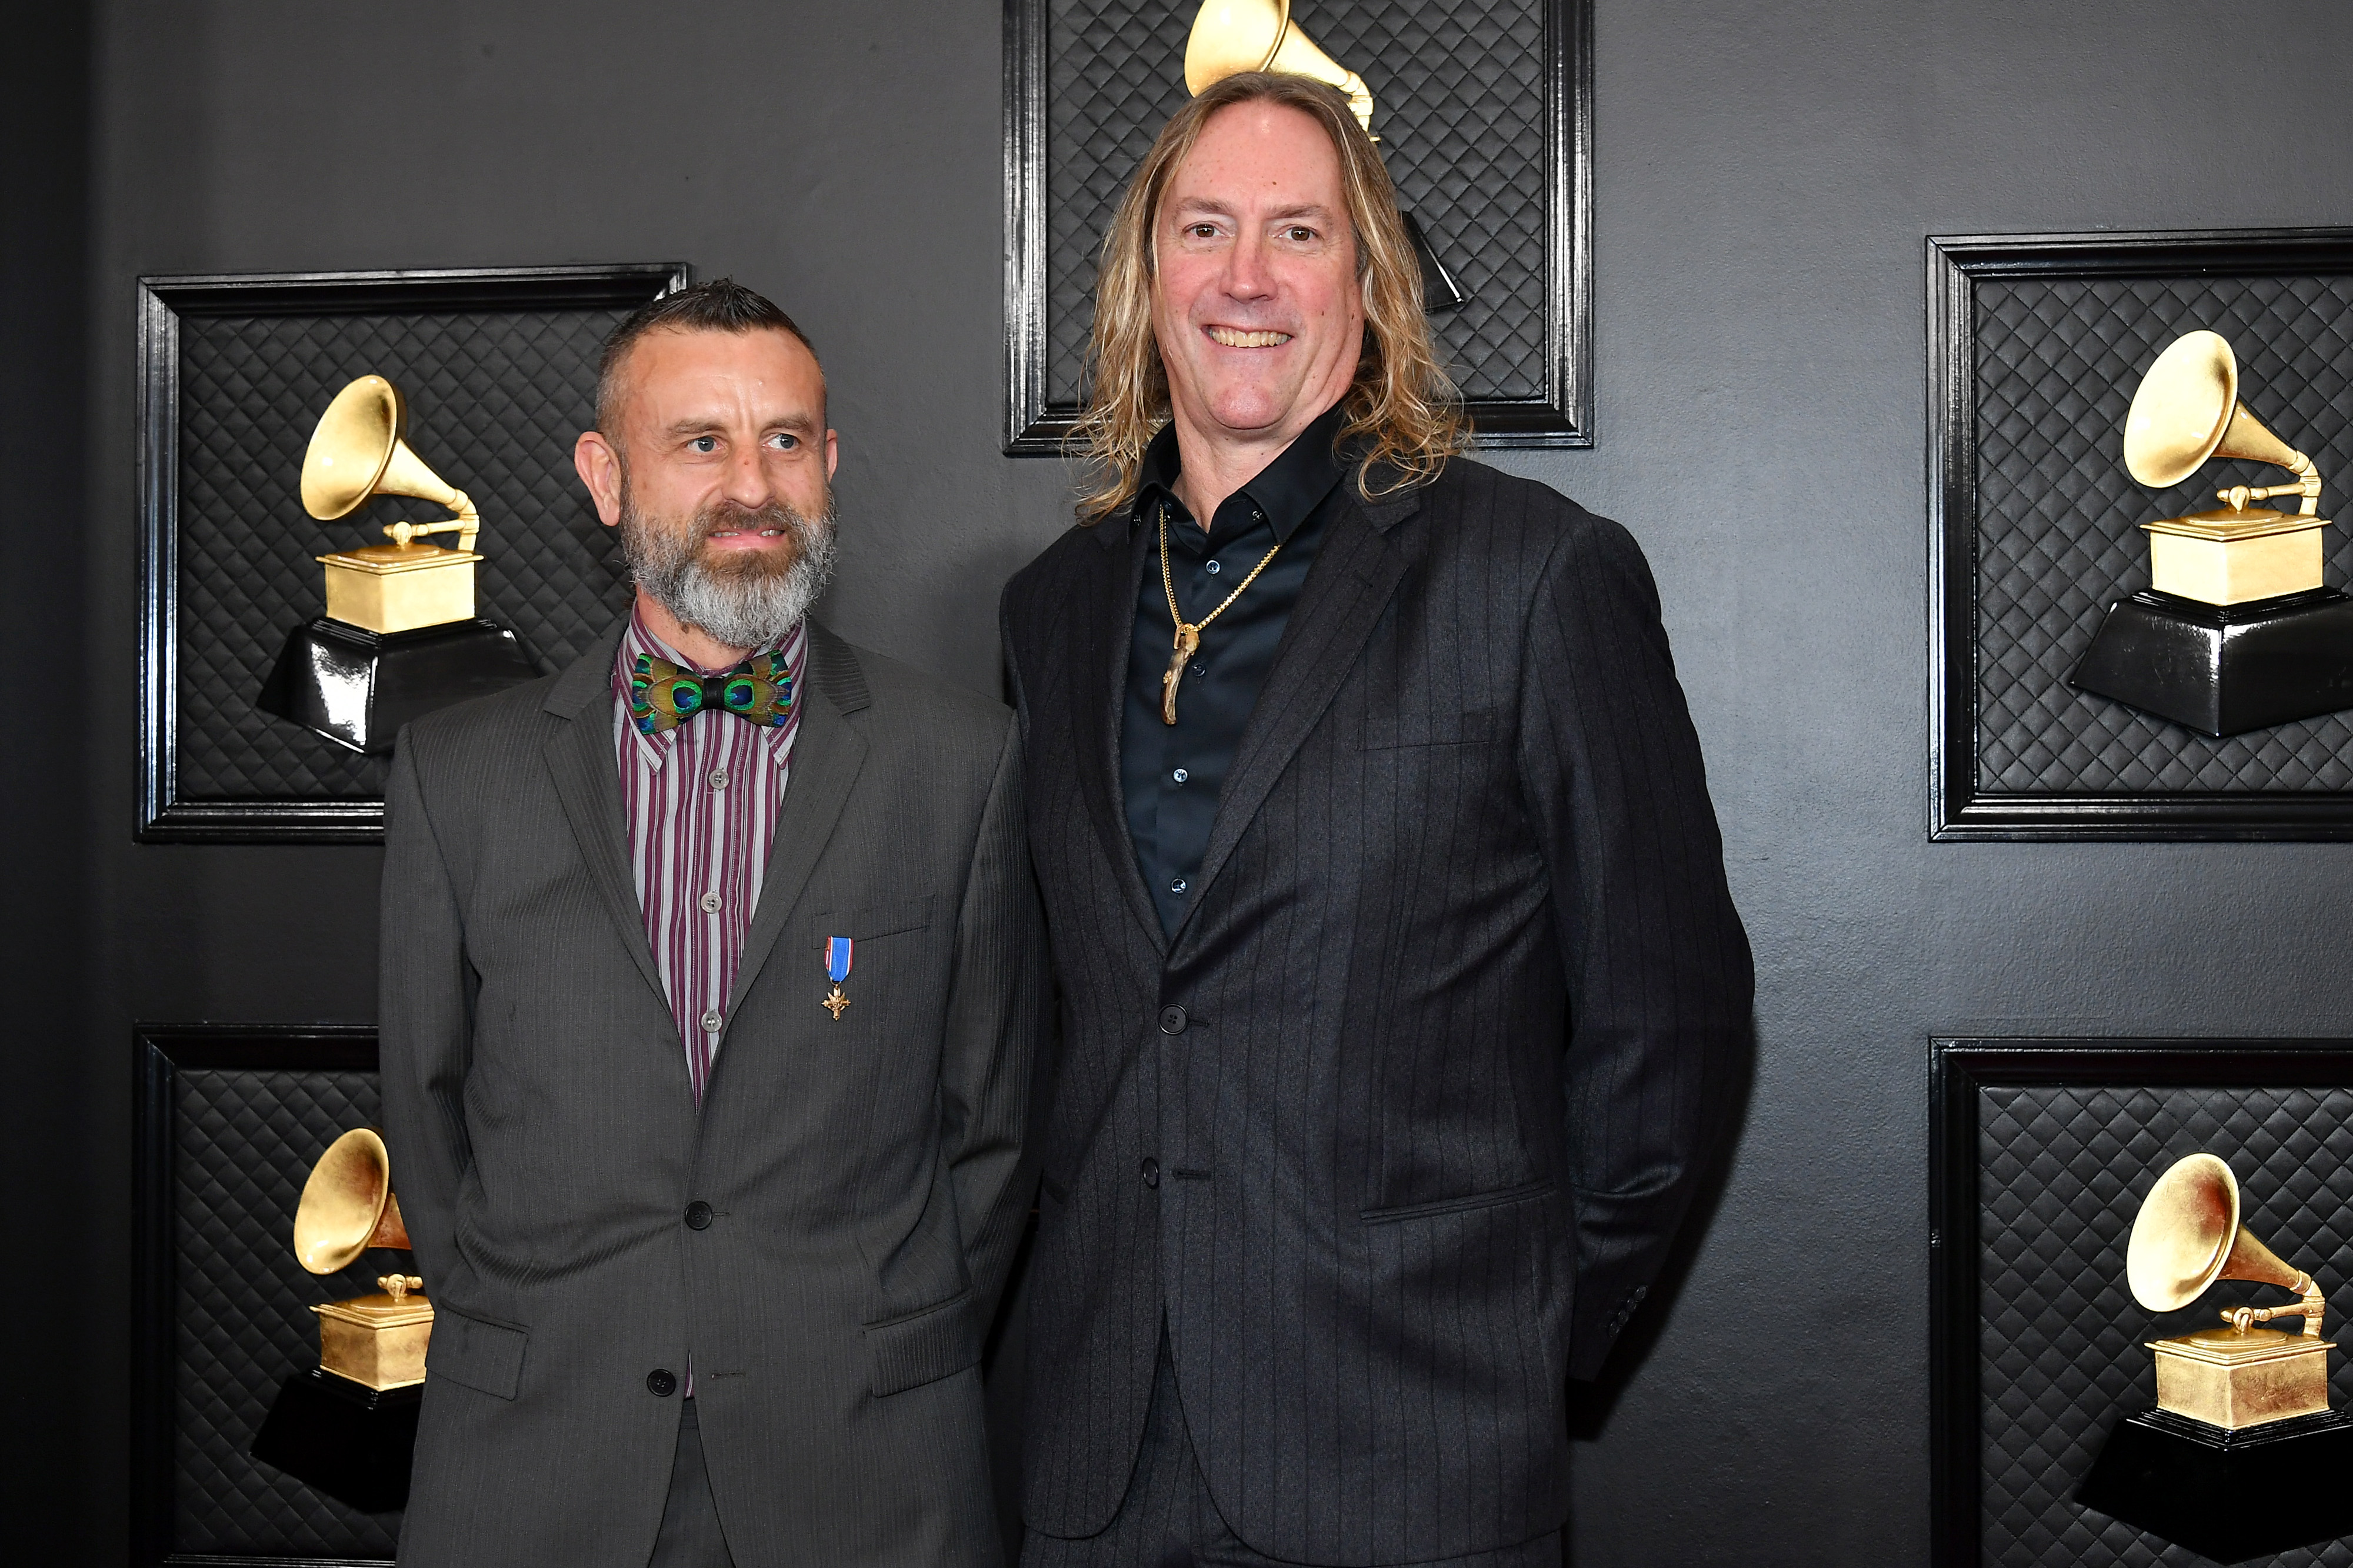 Justin Chancellor and Danny Carey at the Grammys 2020